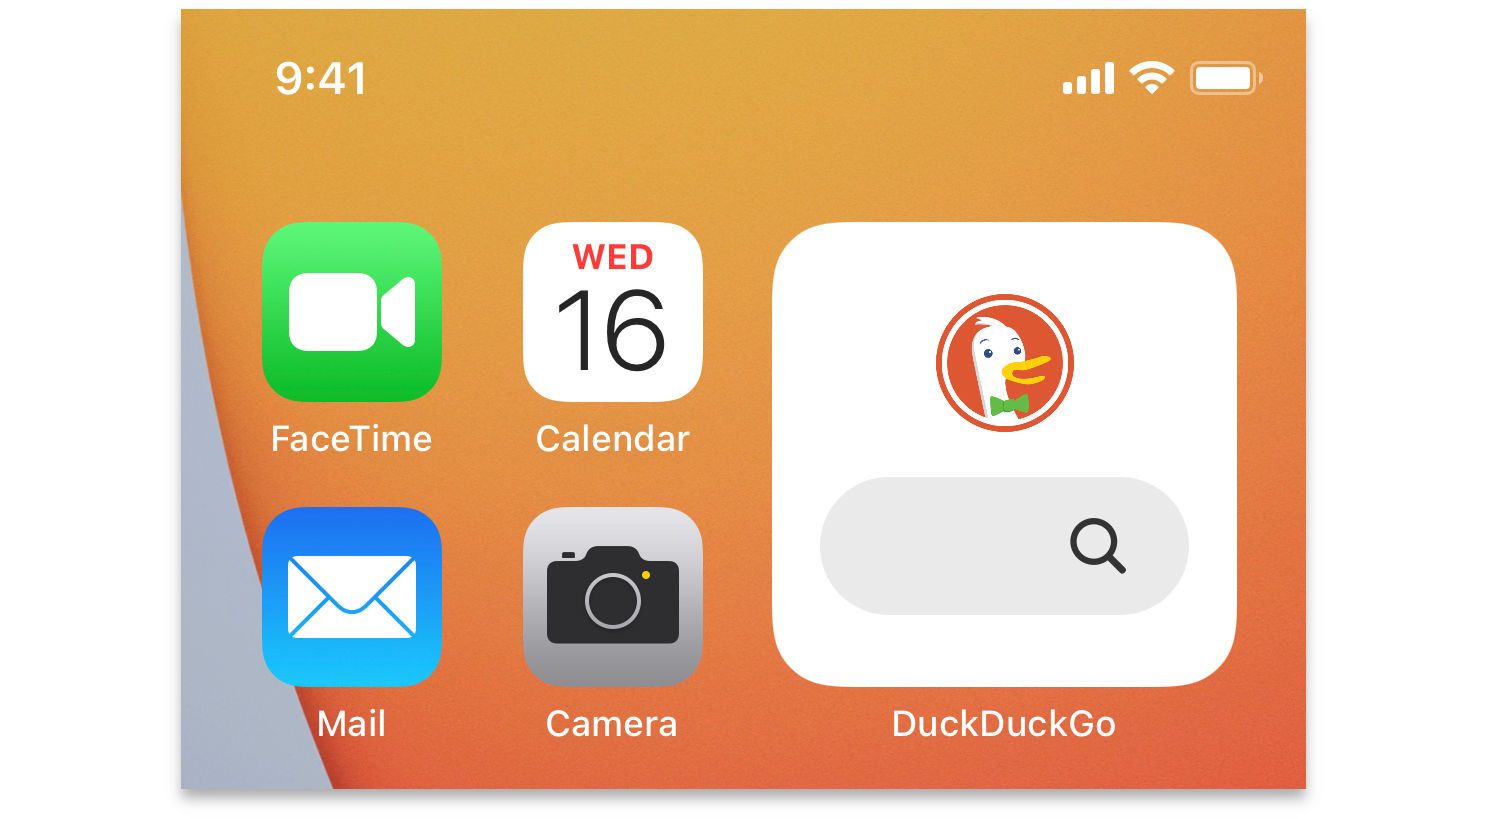 New in iOS 14: Simple Everyday Privacy with DuckDuckGo Privacy Browser